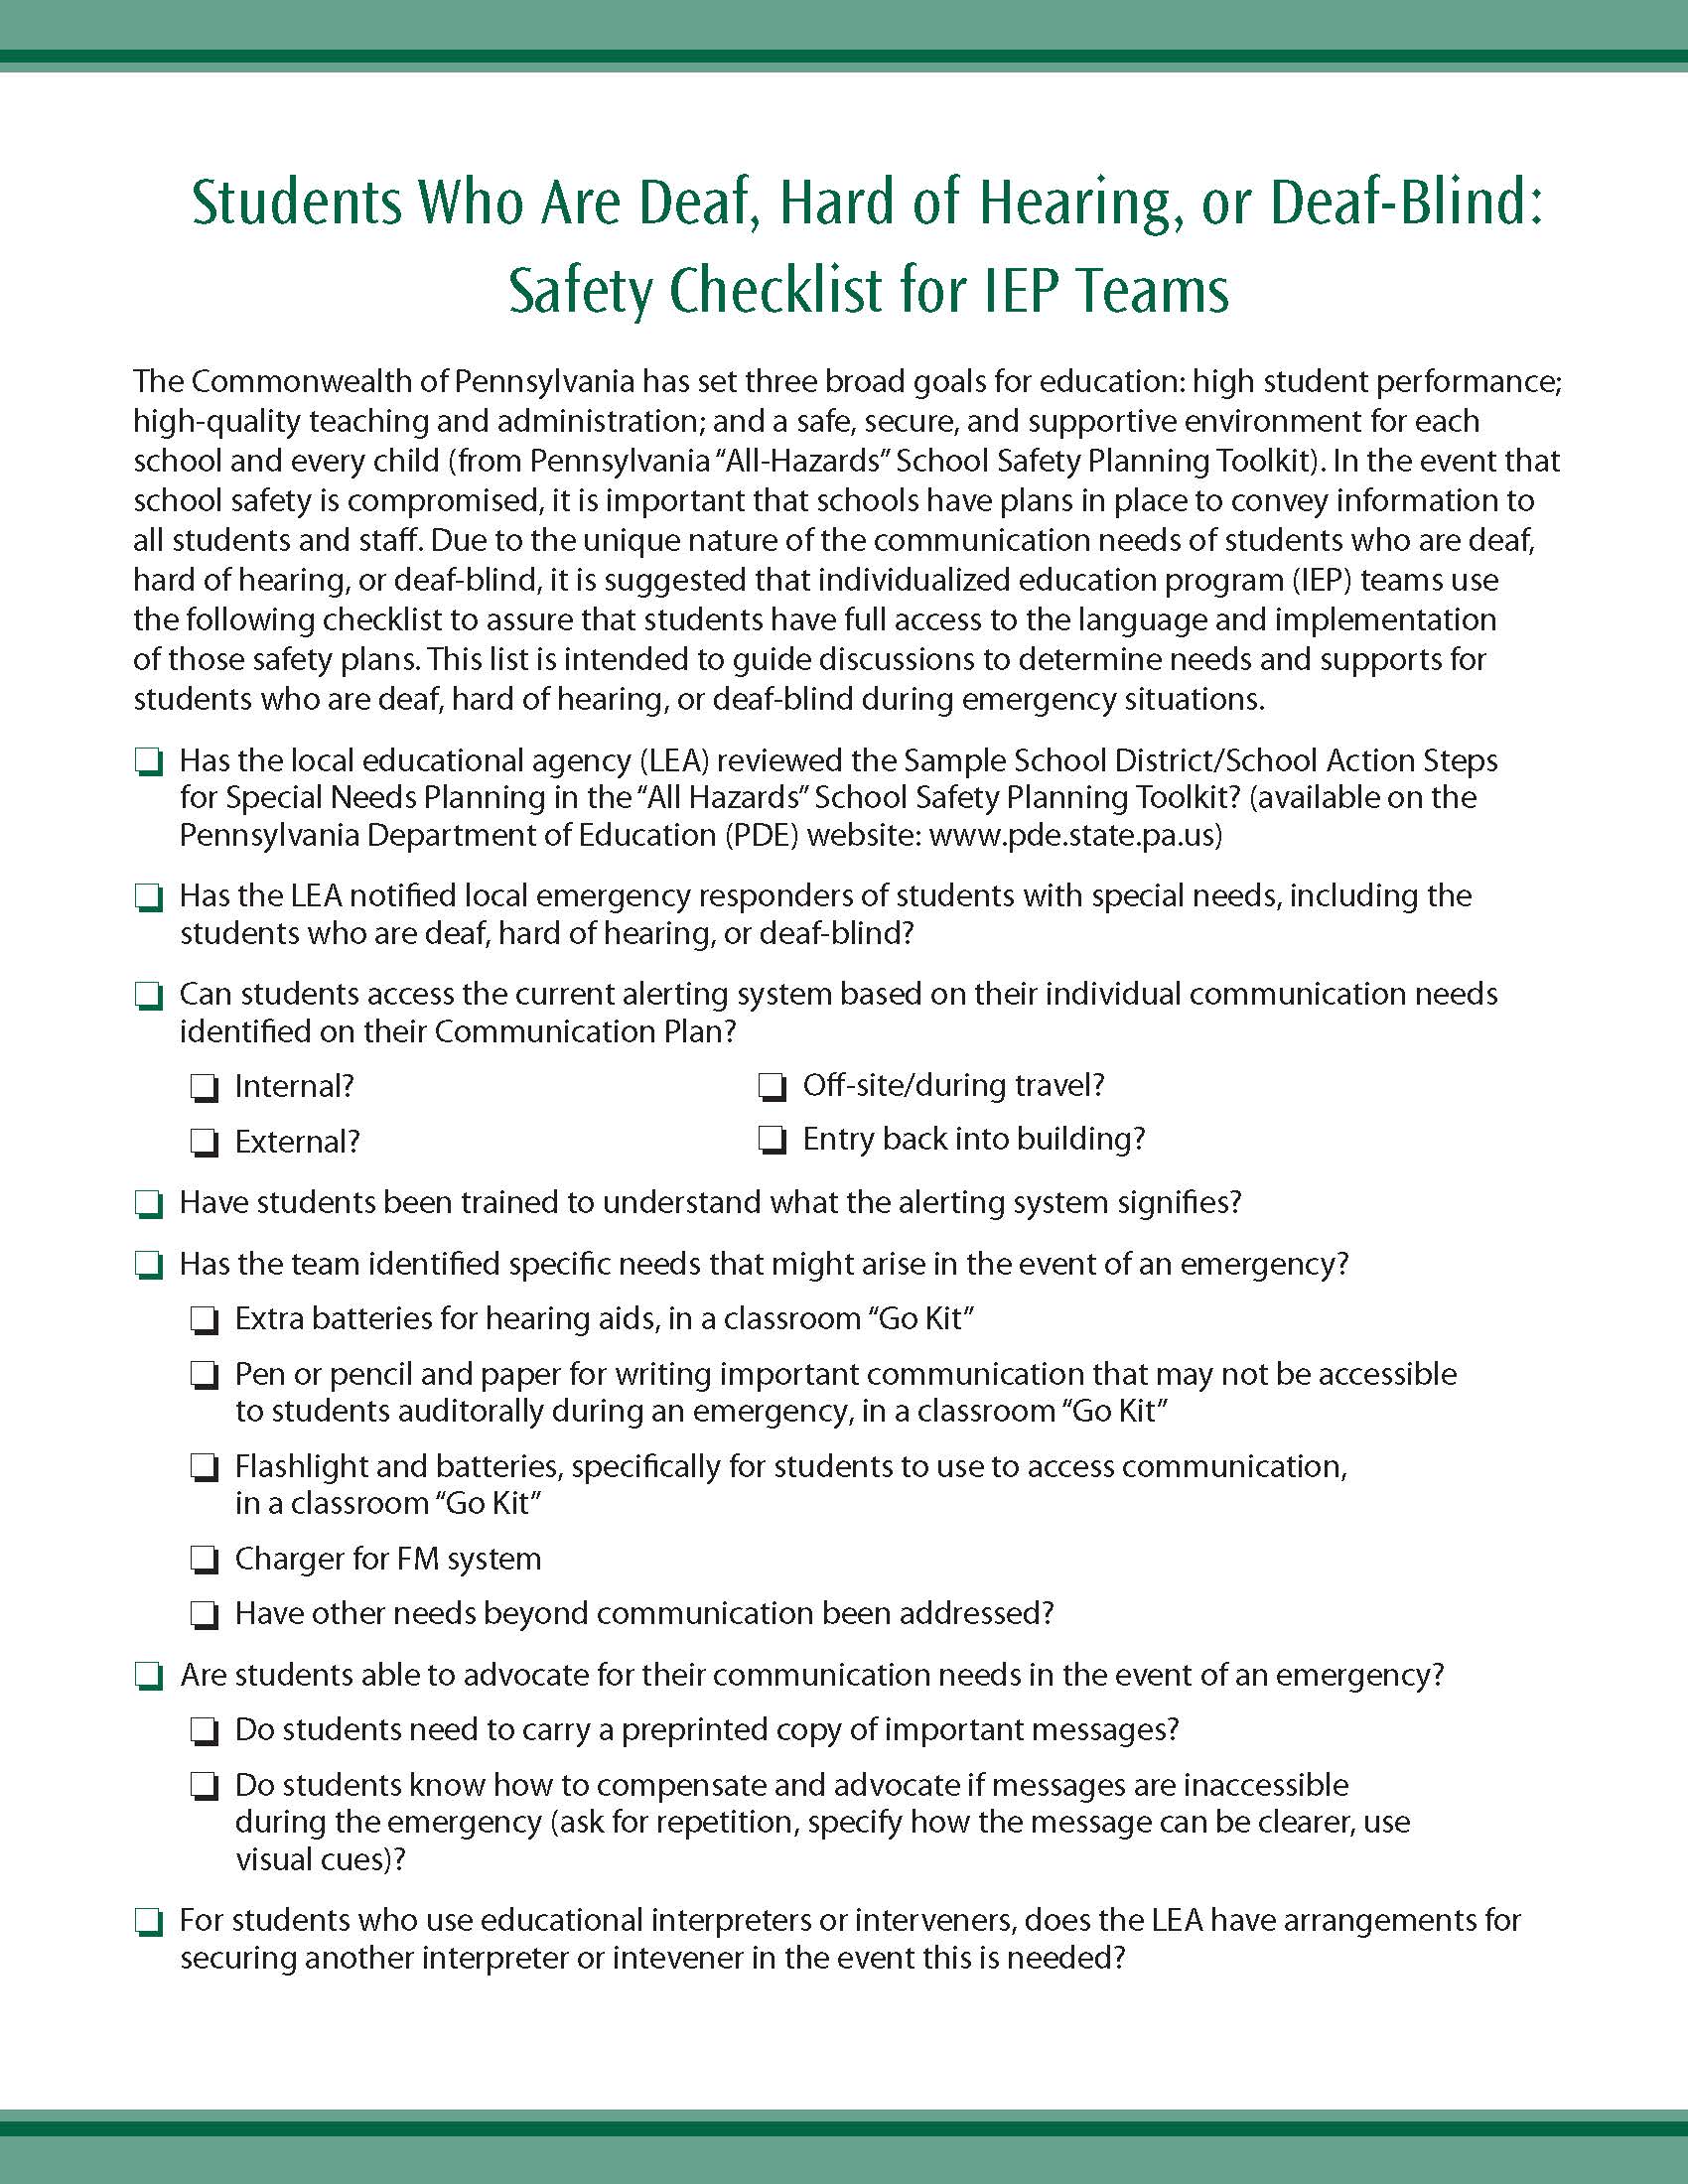 Students Who Are Deaf, Hard of Hearing, or Deaf-Blind: Safety Checklist for IEP Teams